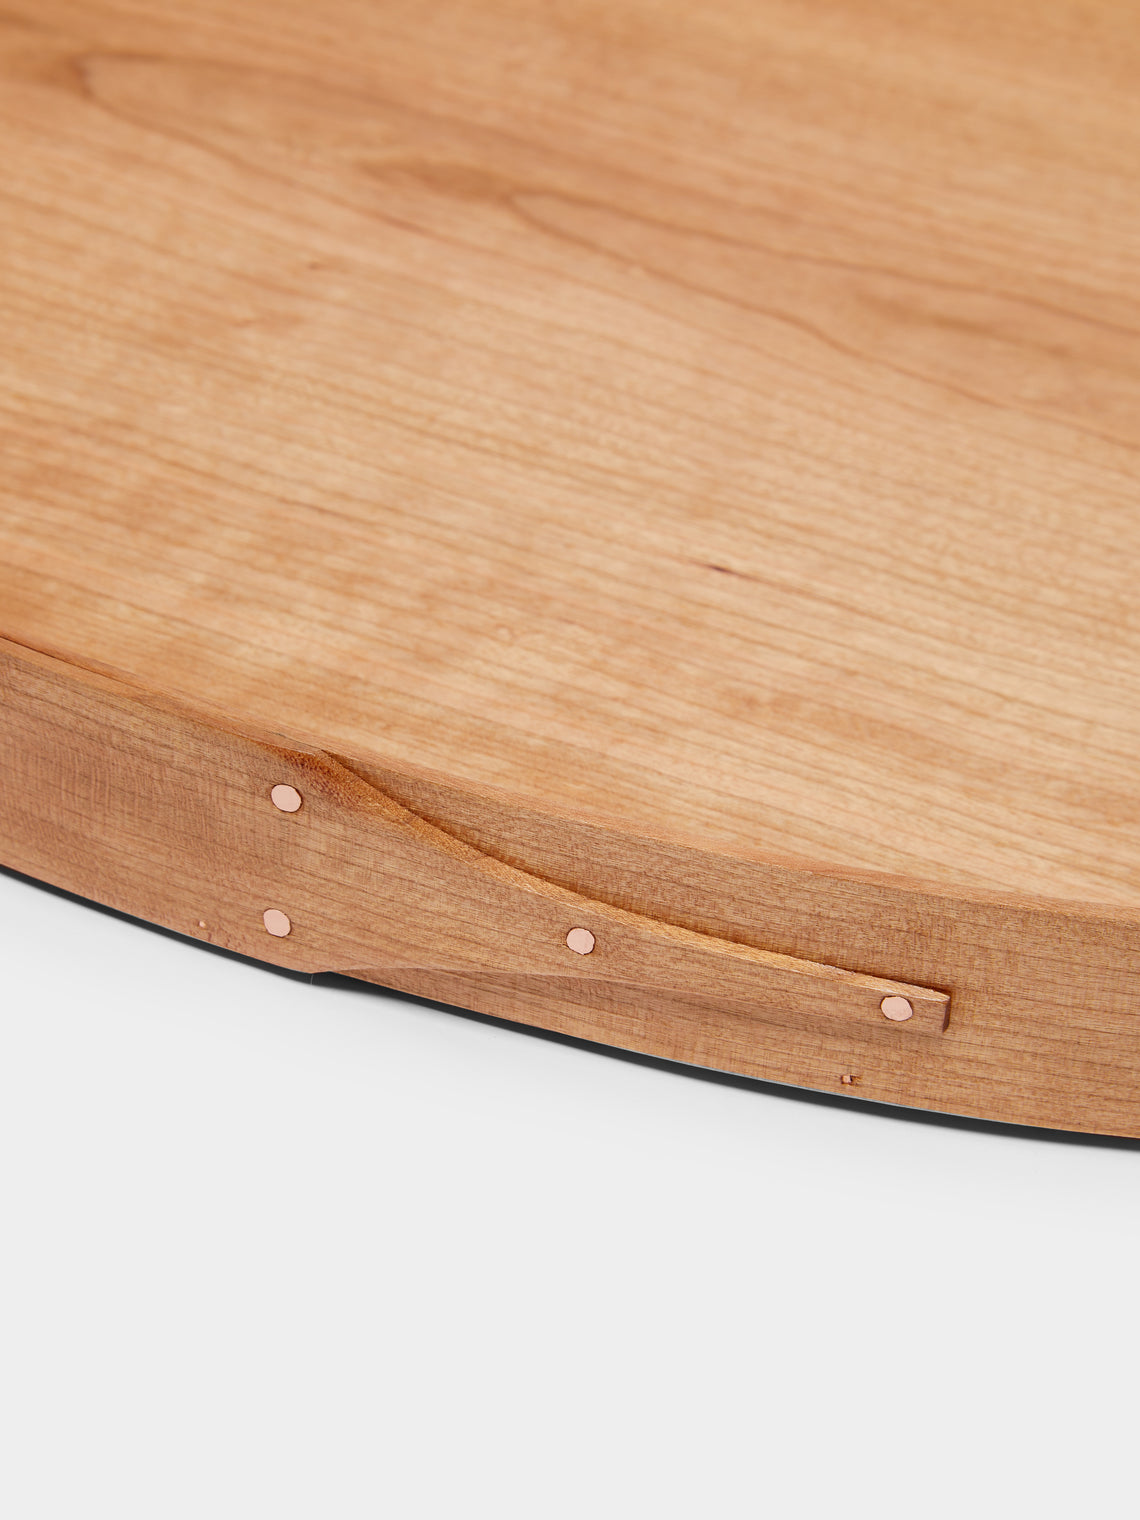 Rikke Falkow - Cherry Wood Oval Serving Tray -  - ABASK